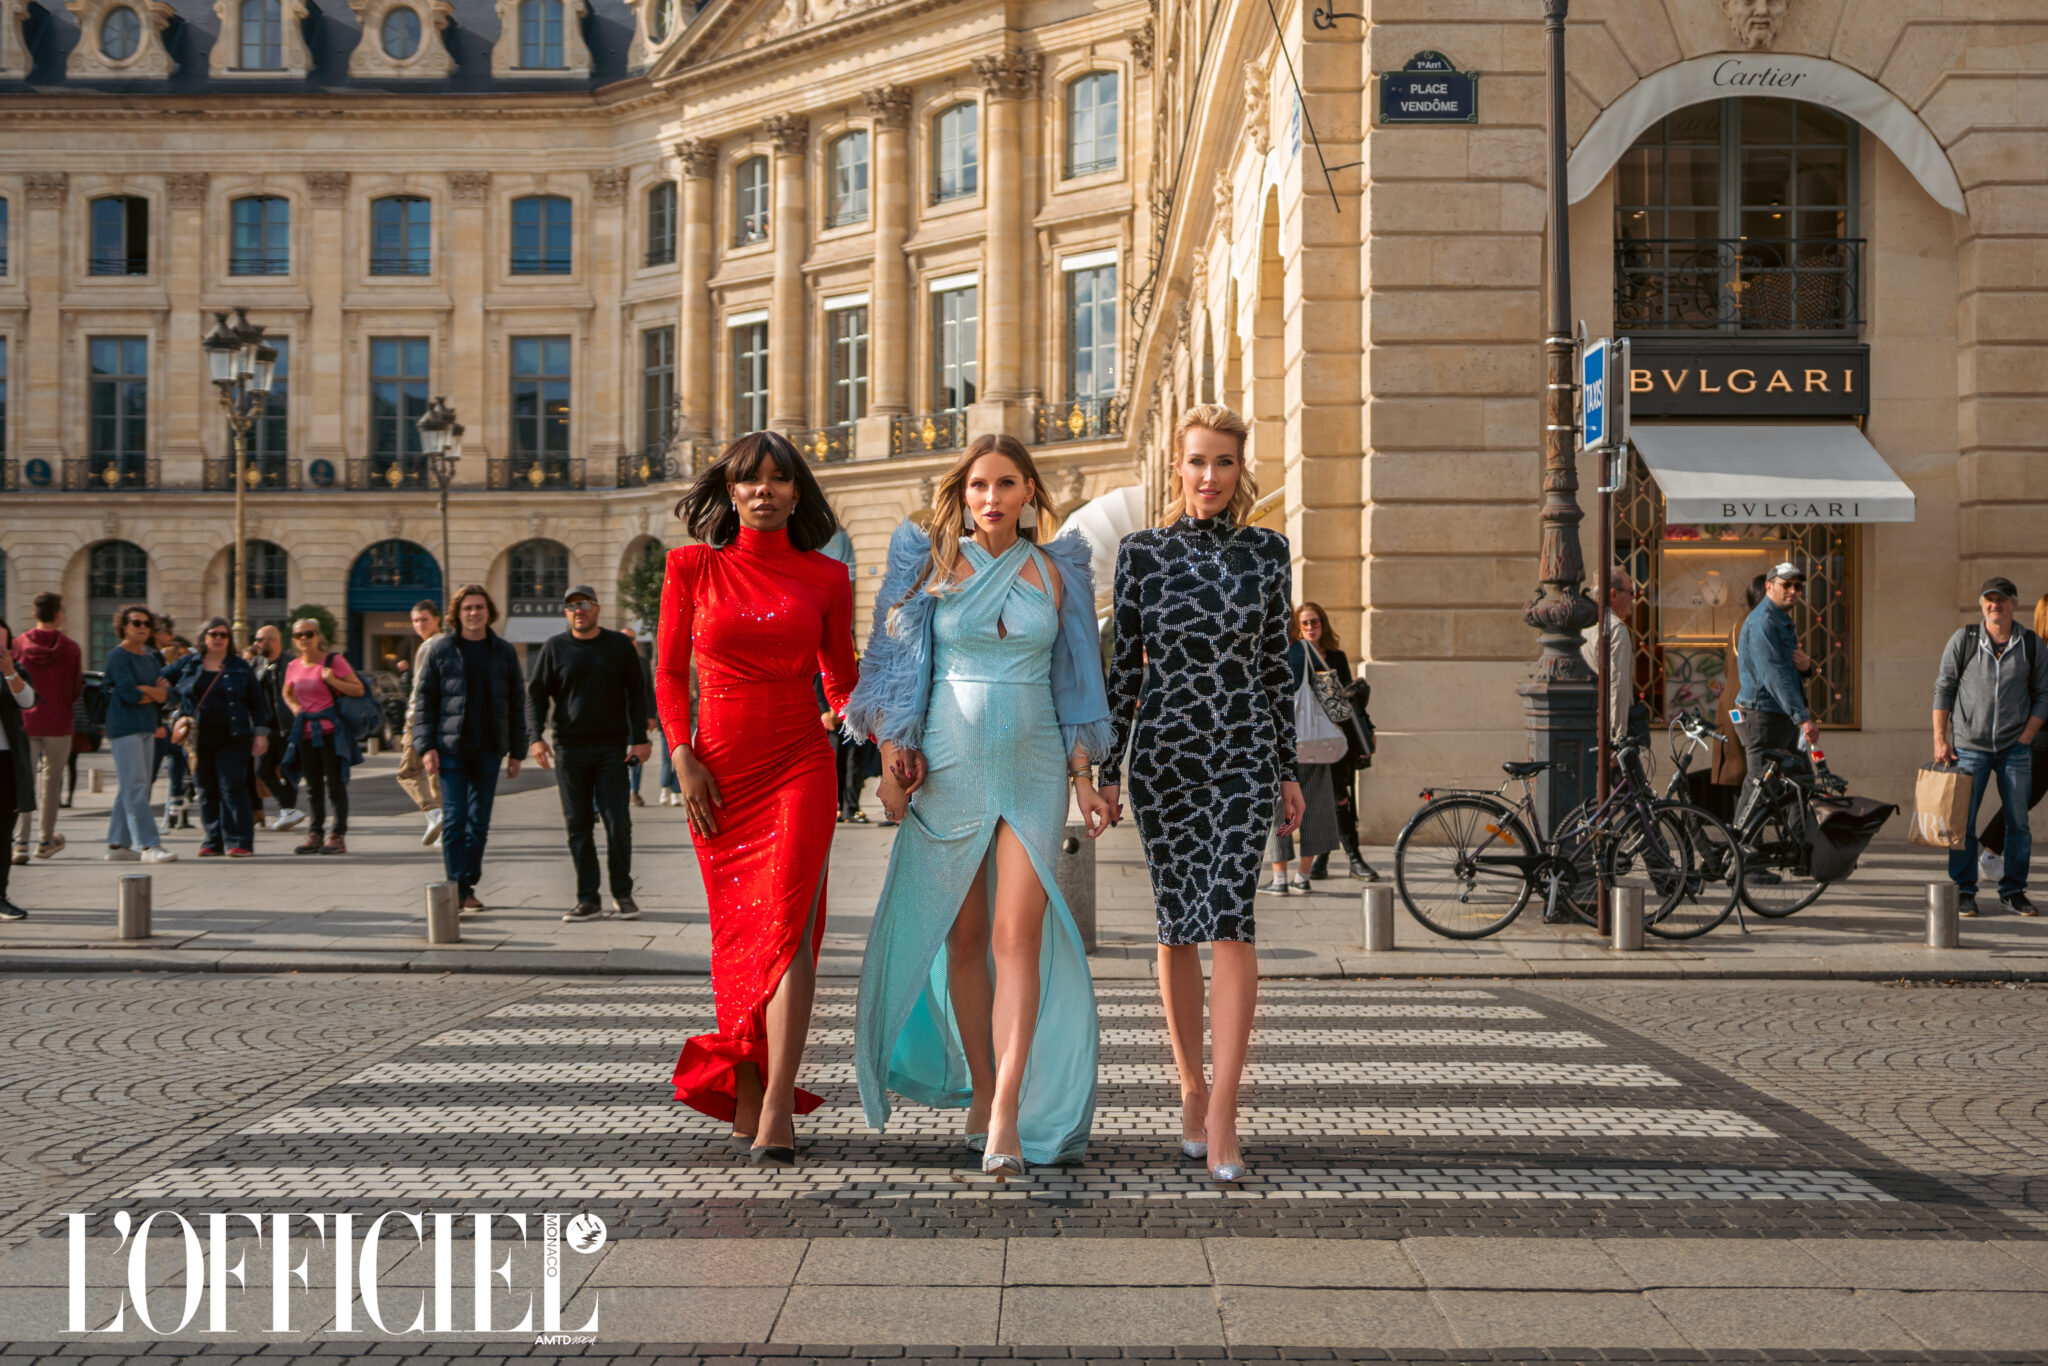 Feature at L'Officiel Monaco during Paris Fashion Week SS 23. Visual Fashion Story from the magical Paris. Featuring: Nicolas Besson, Gemy Maalouf, Charriol, Sol Angelann and more. 11